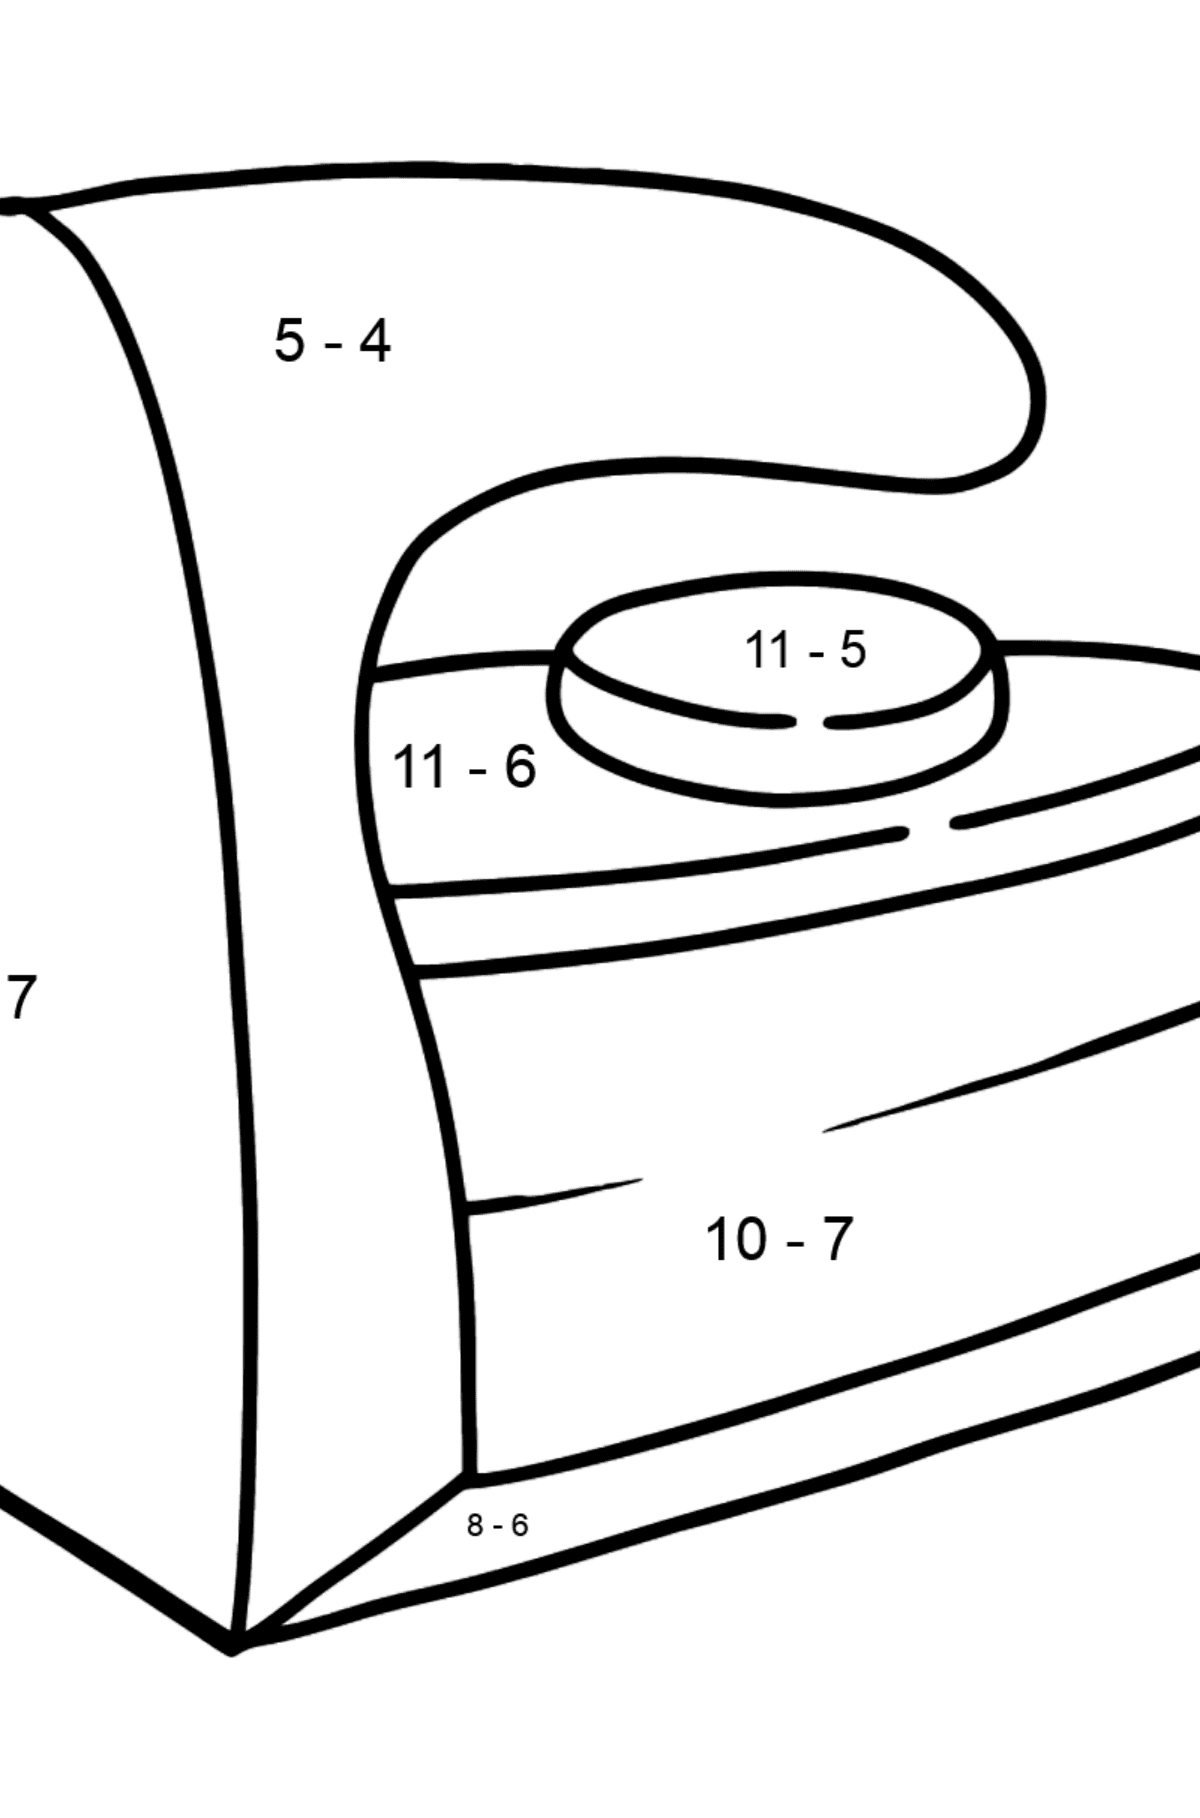 Iron for ironing coloring page - Math Coloring - Subtraction for Kids